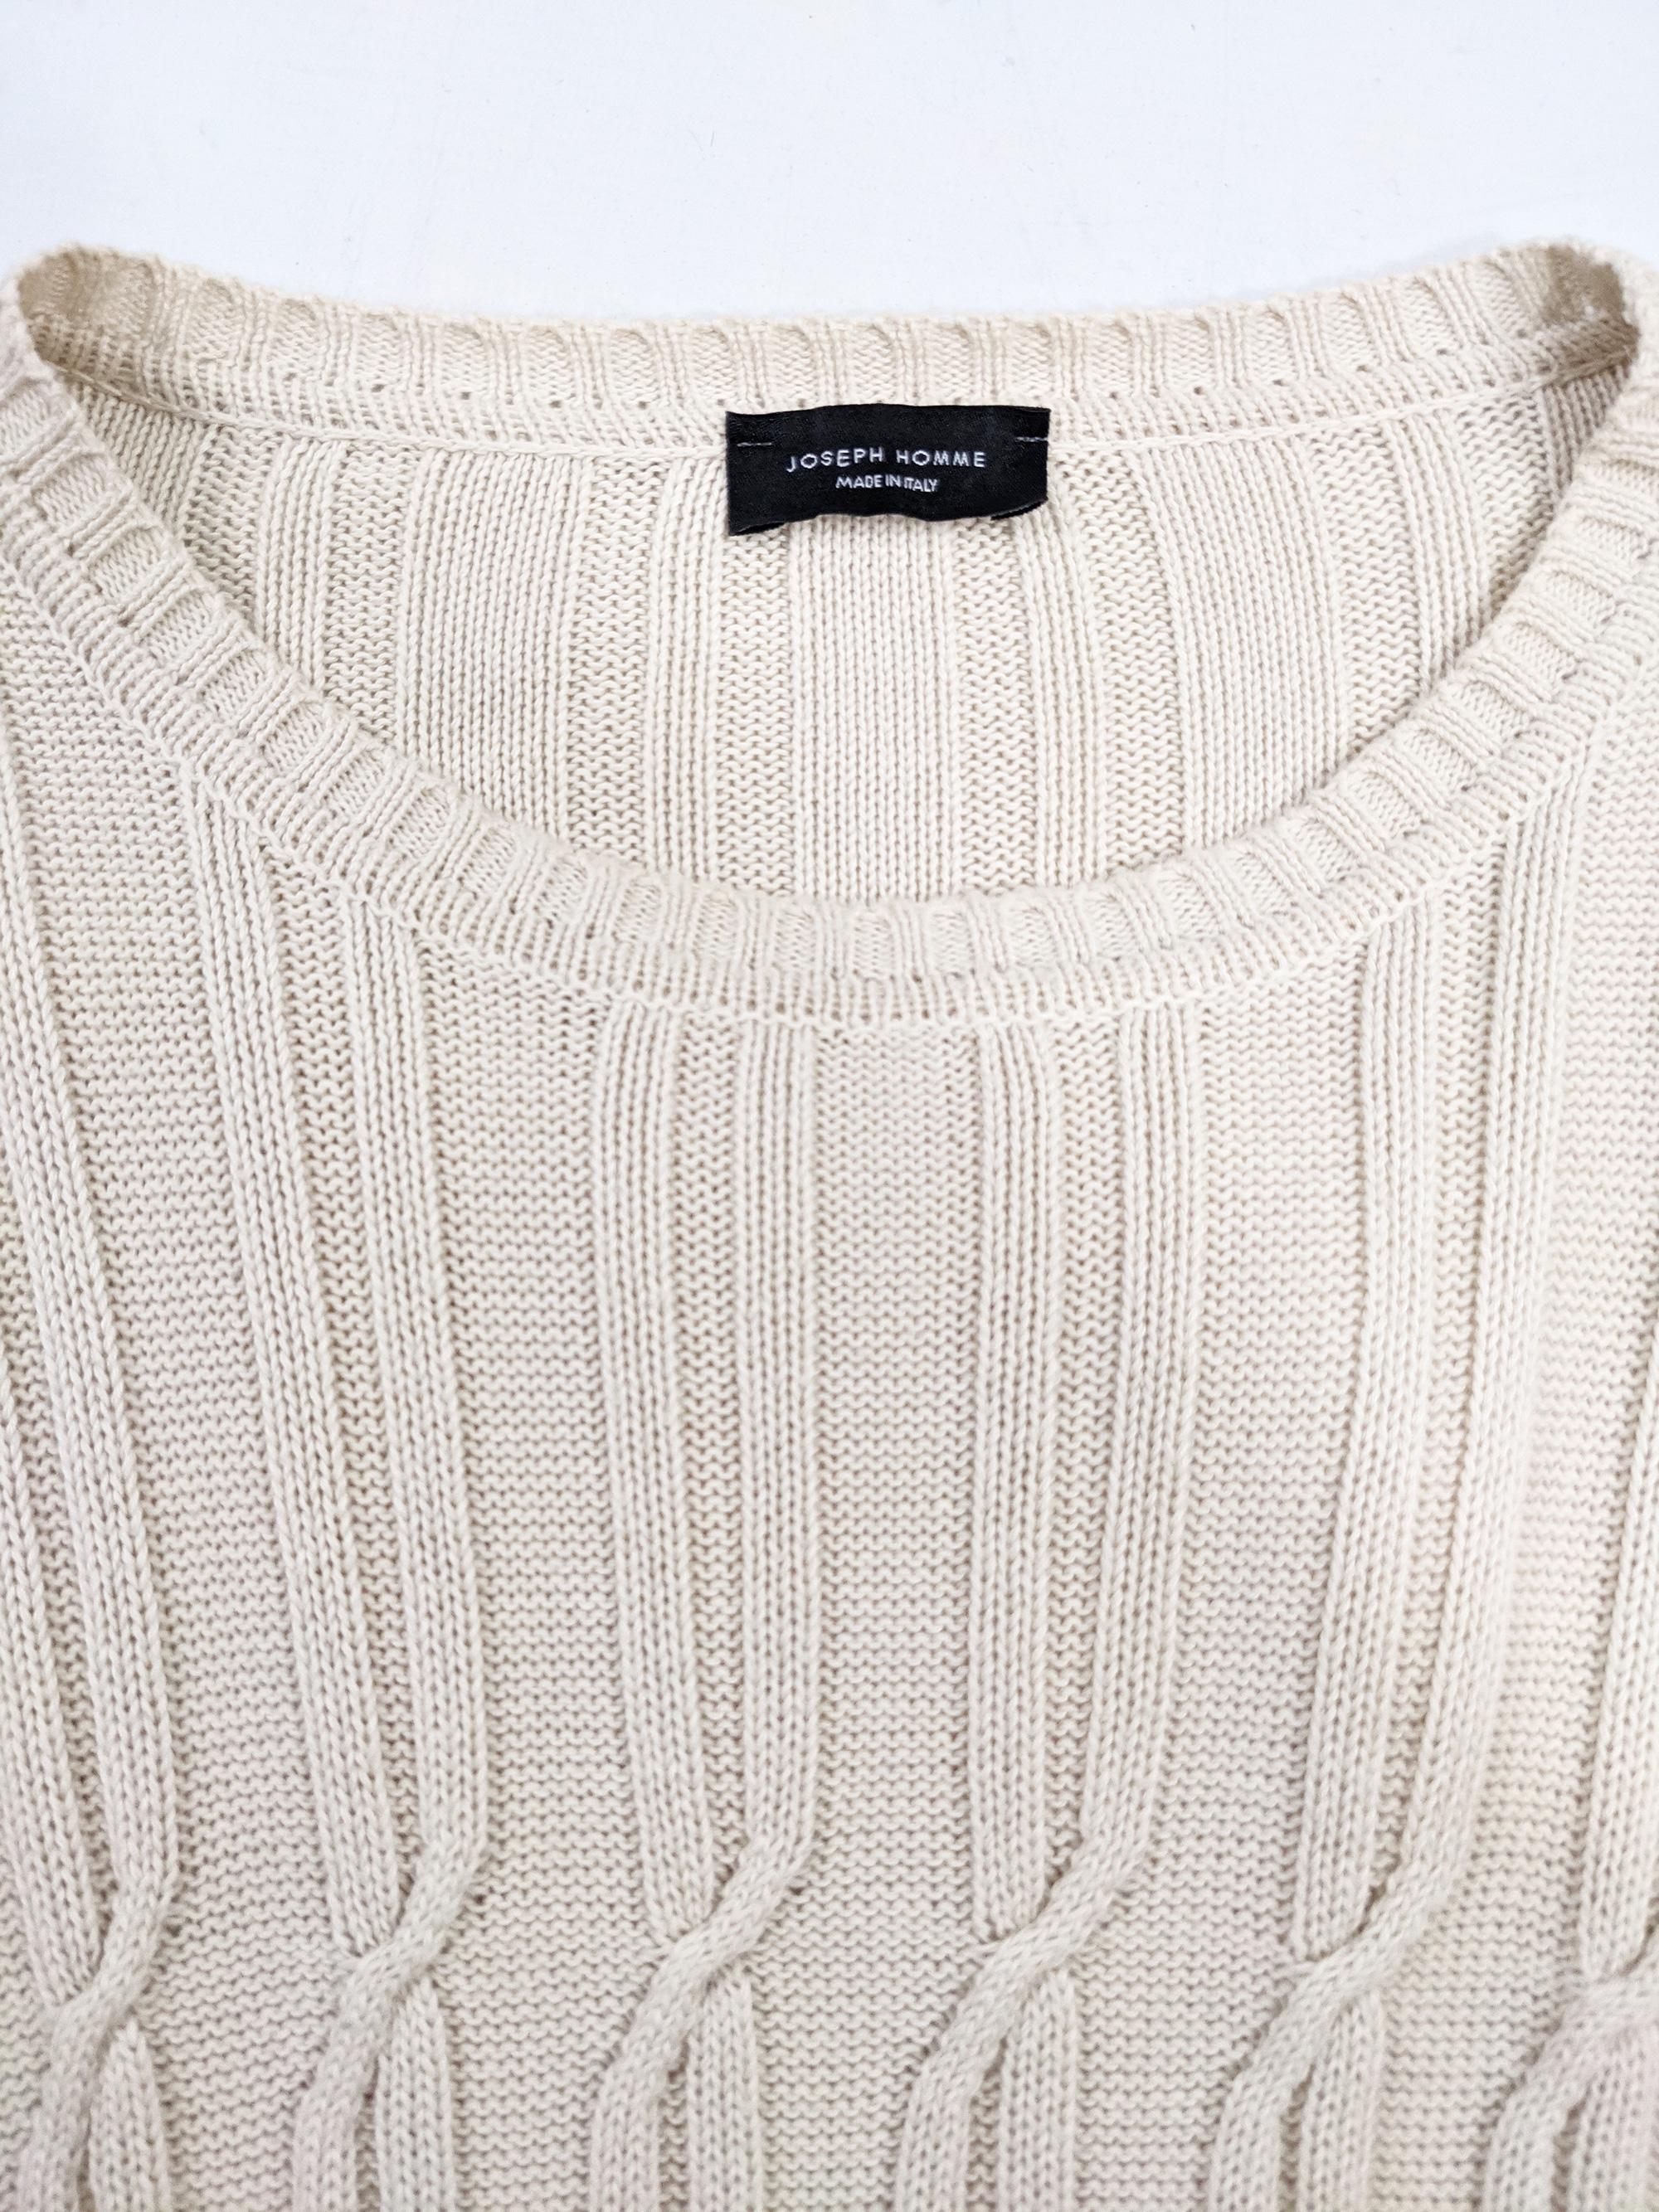 Joseph Homme Mens Vintage Cream Slim Fit Cable Knit Crew Neck Sweater, 1990s In Excellent Condition For Sale In Doncaster, South Yorkshire